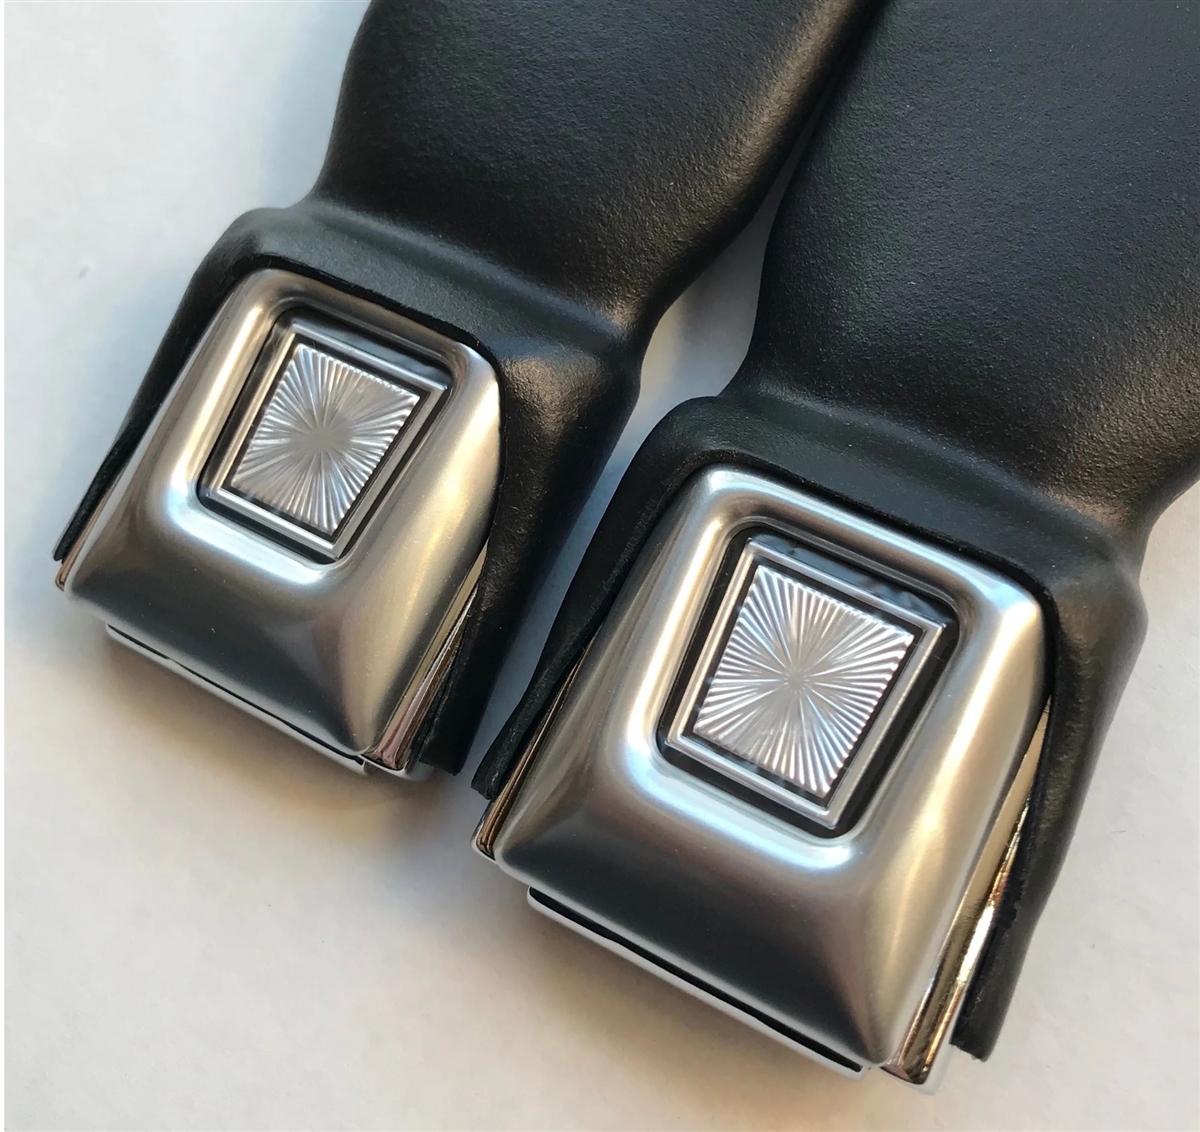 Firebird Central  1970 - 1973 Firebird FRONT Seatbelts Set, Retractable  Shoulder 3 Point, Starburst Buckles with Plain Chrome Buttons and Choice of  Belts Color, Purchase Today!